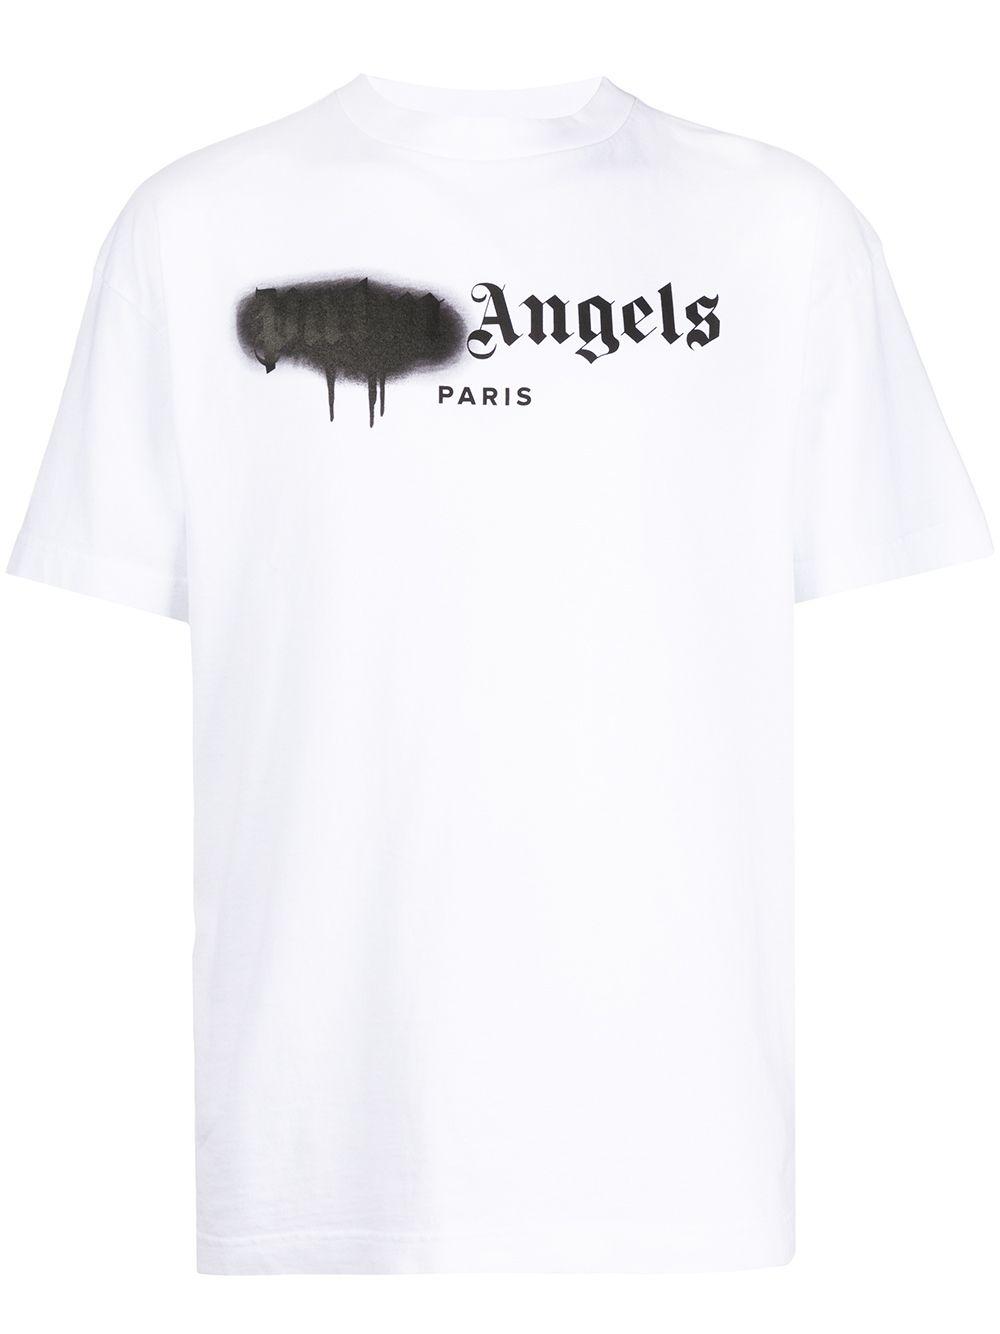 Palm Angels Logo Print T-shirt in White for Men - Lyst